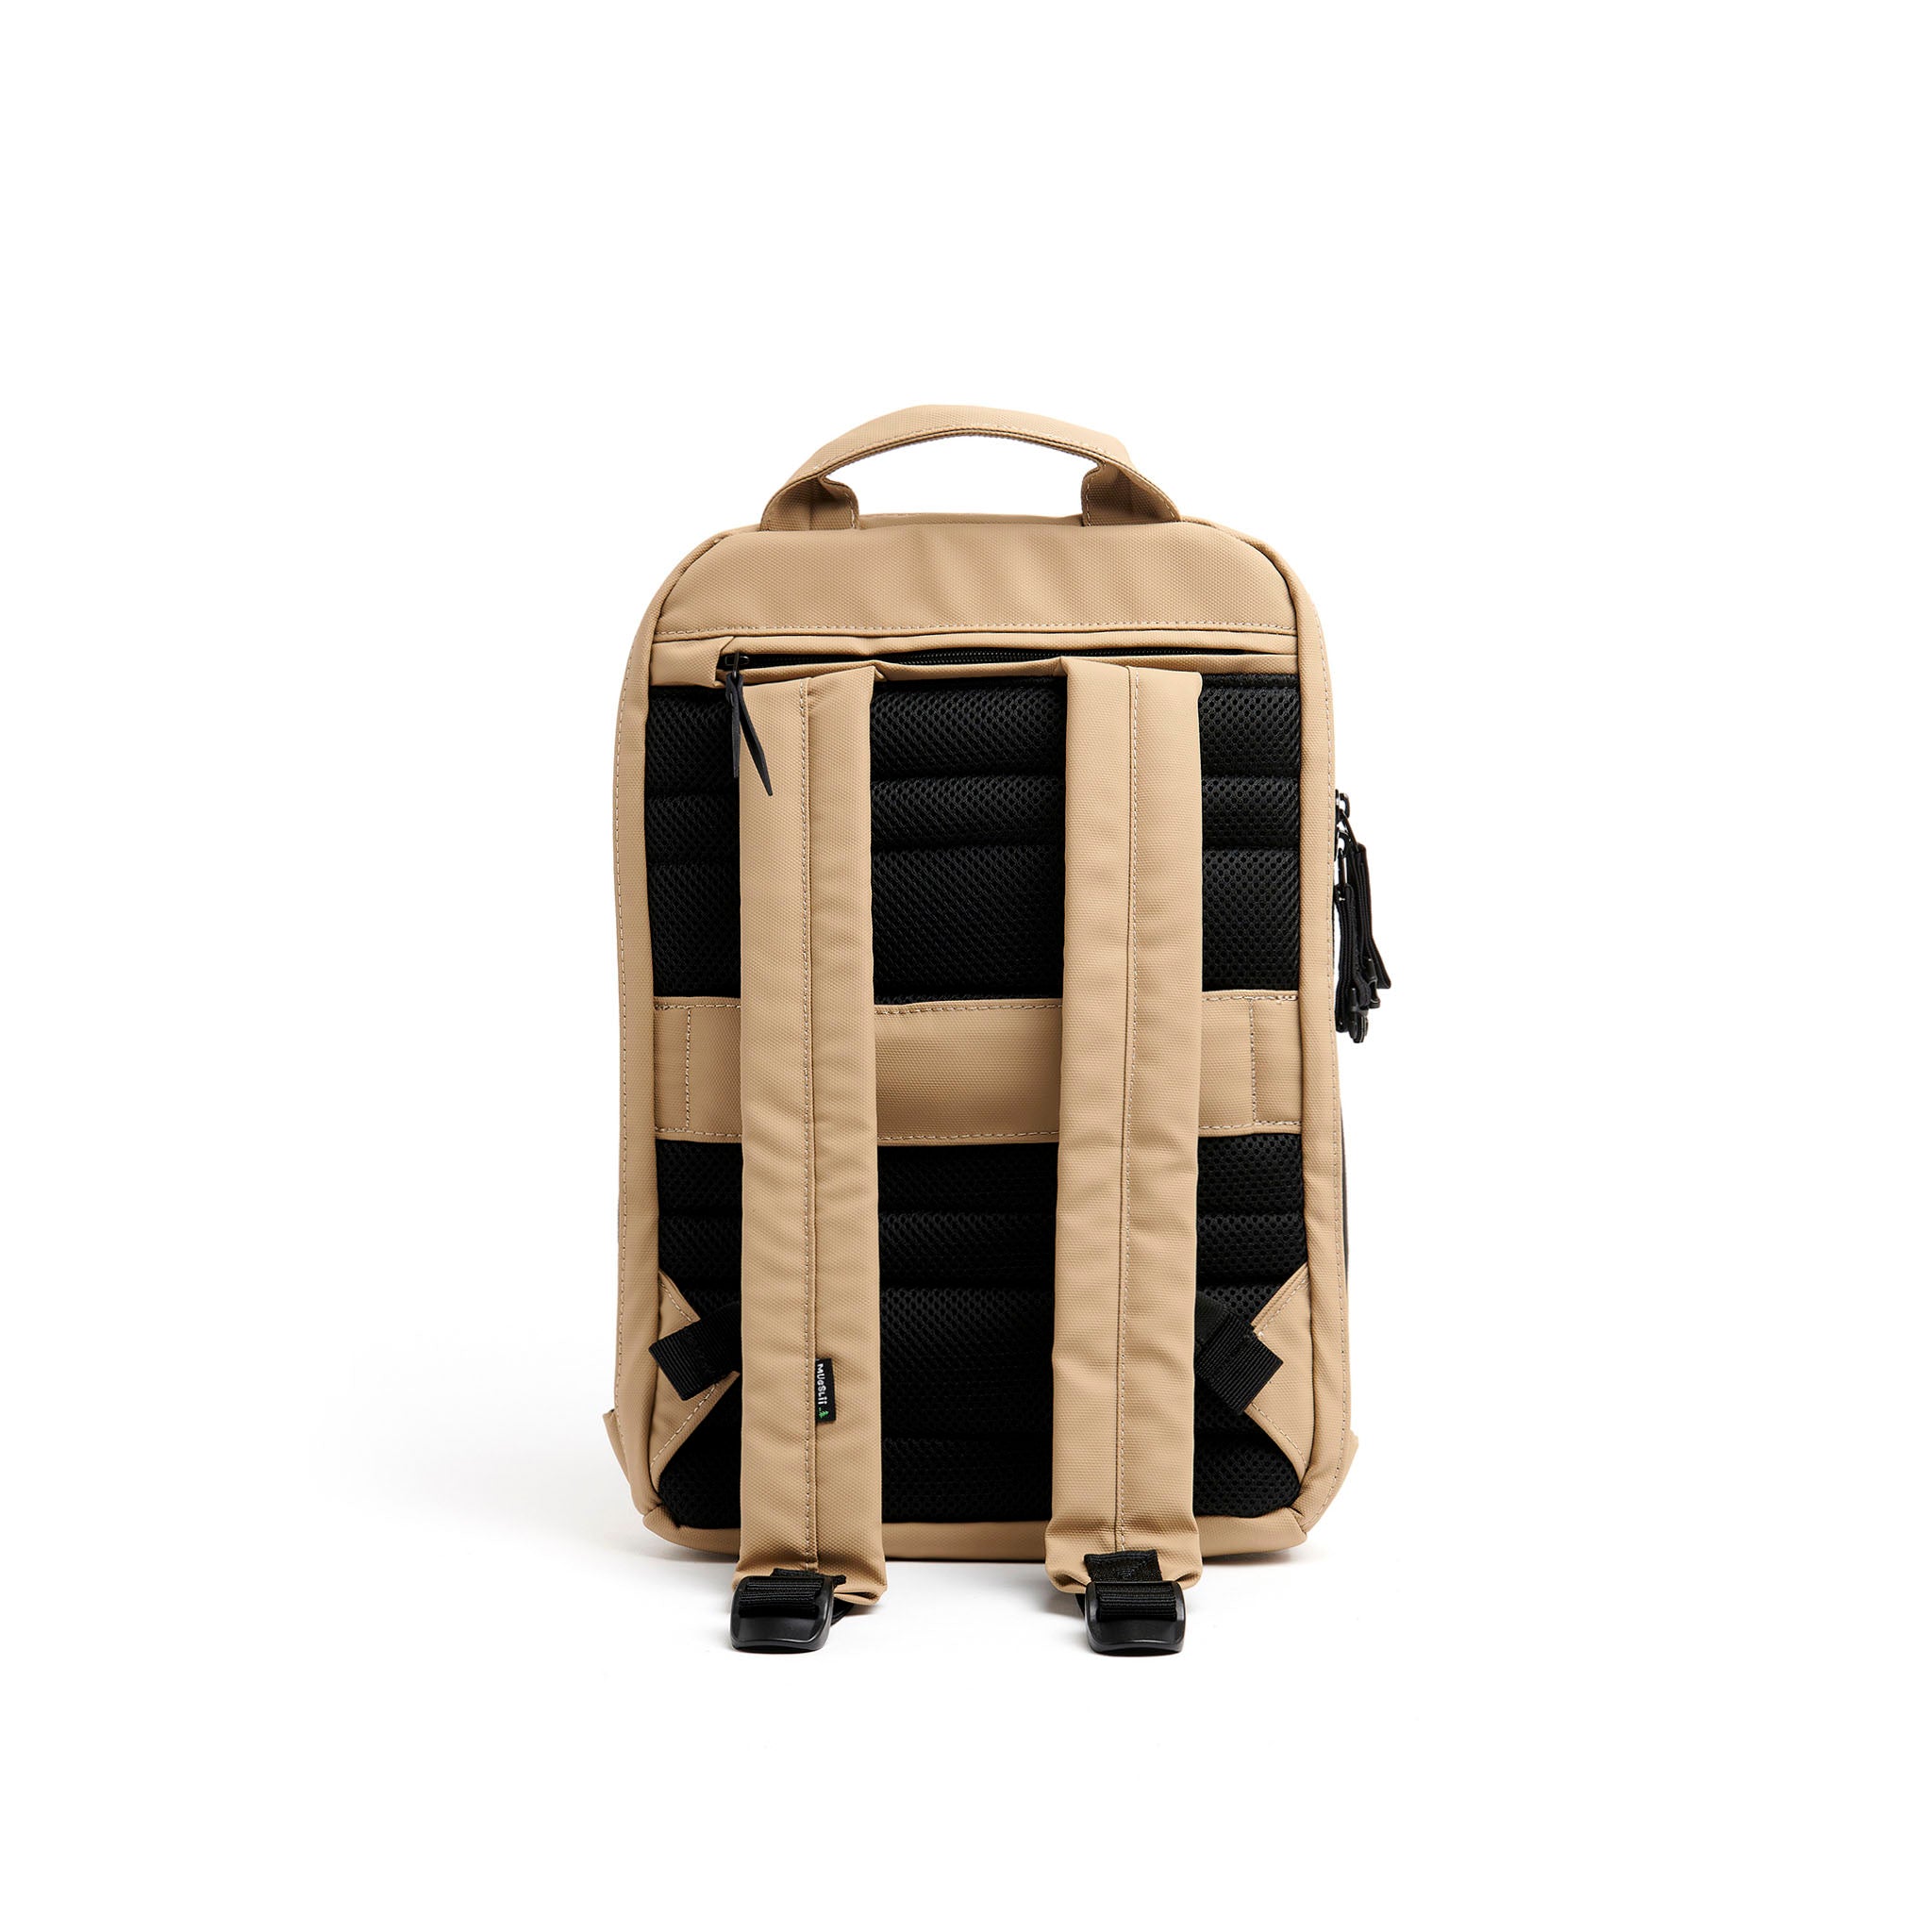 Mueslii small backpack, made of PU coated waterproof nylon, with a laptop compartment, color sand, back view.